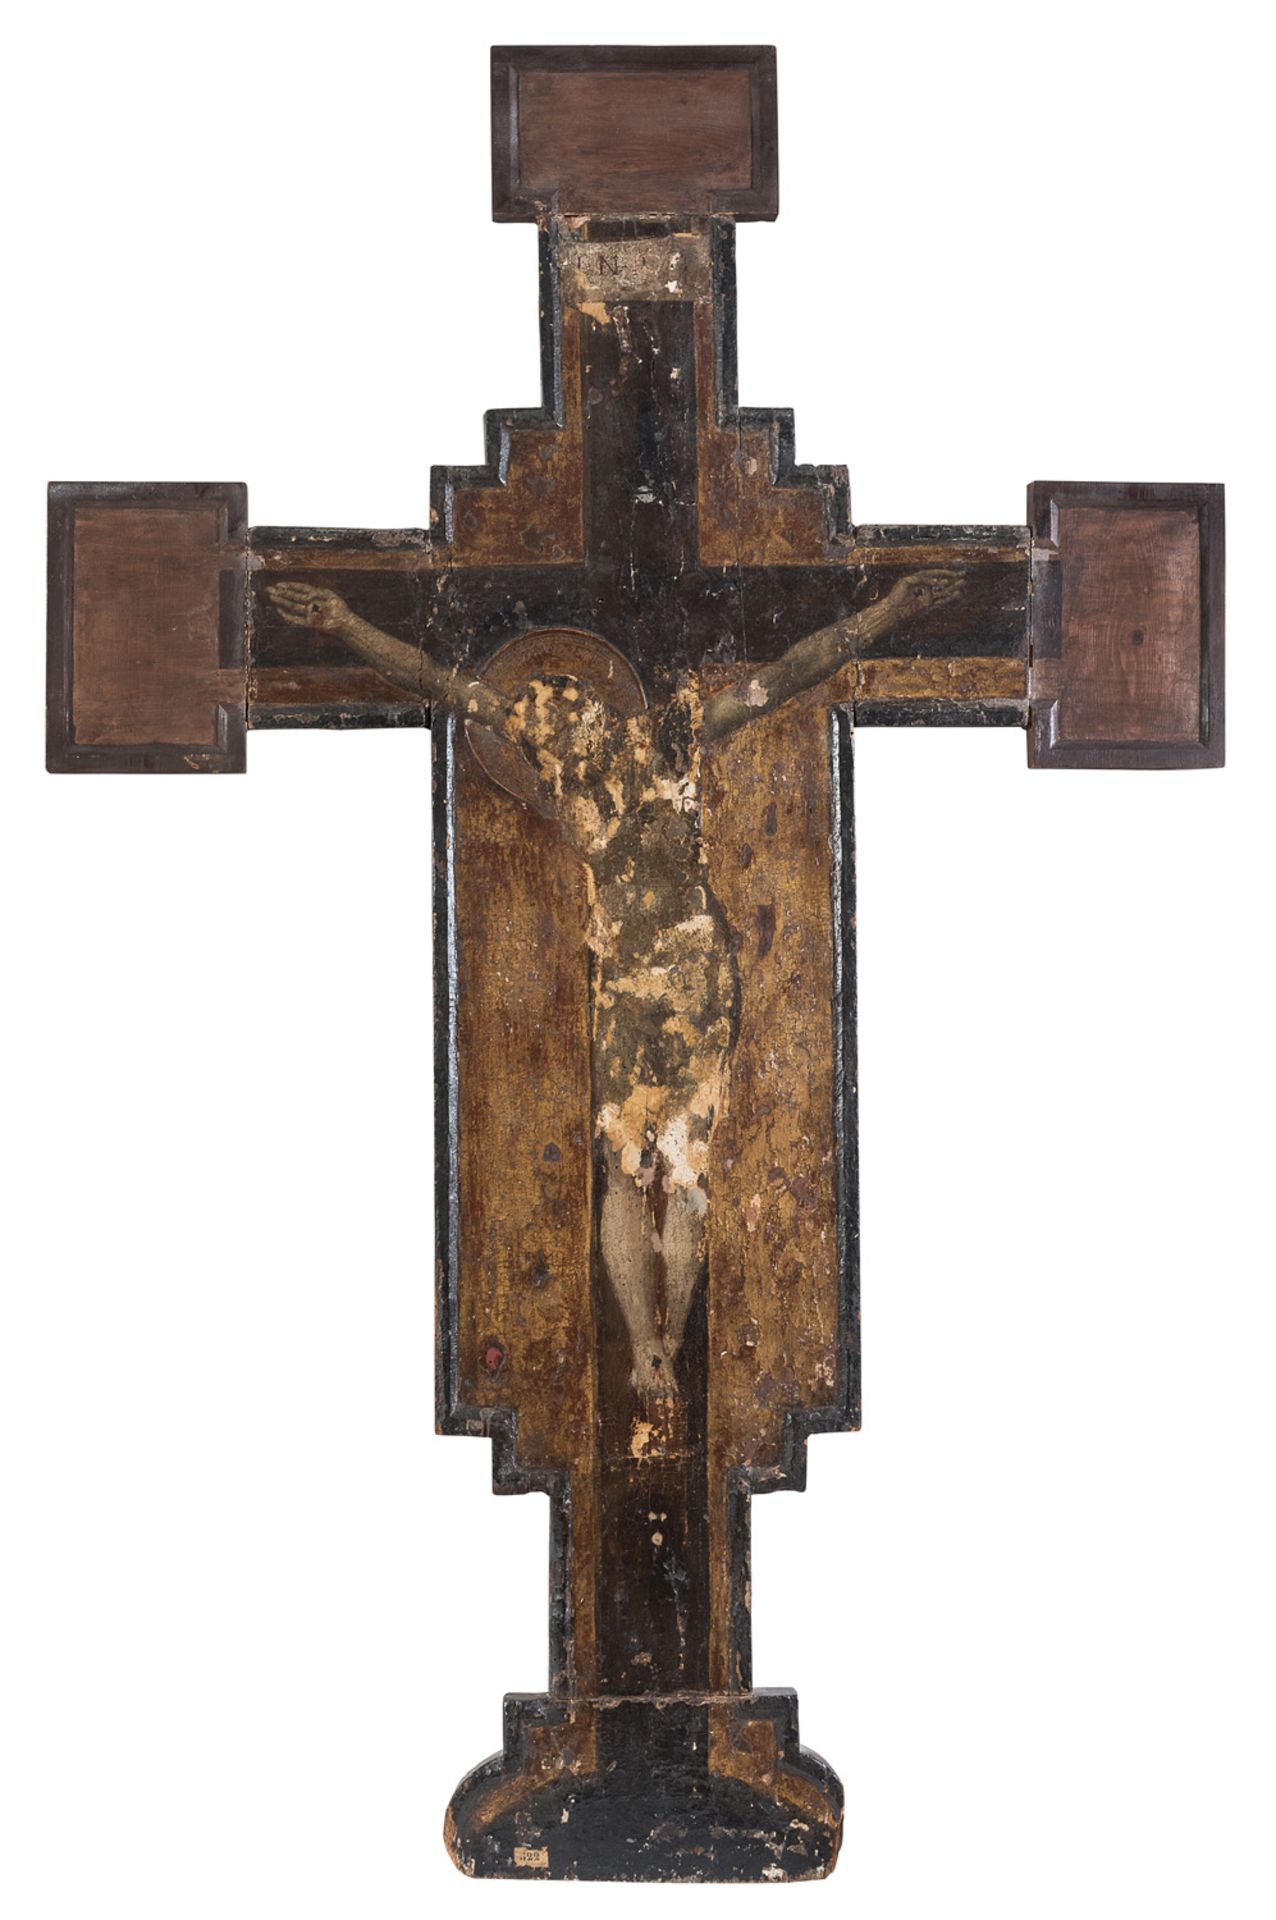 TEMPERA PAINTED CRUCIFIX EARLY 15TH CENTURY